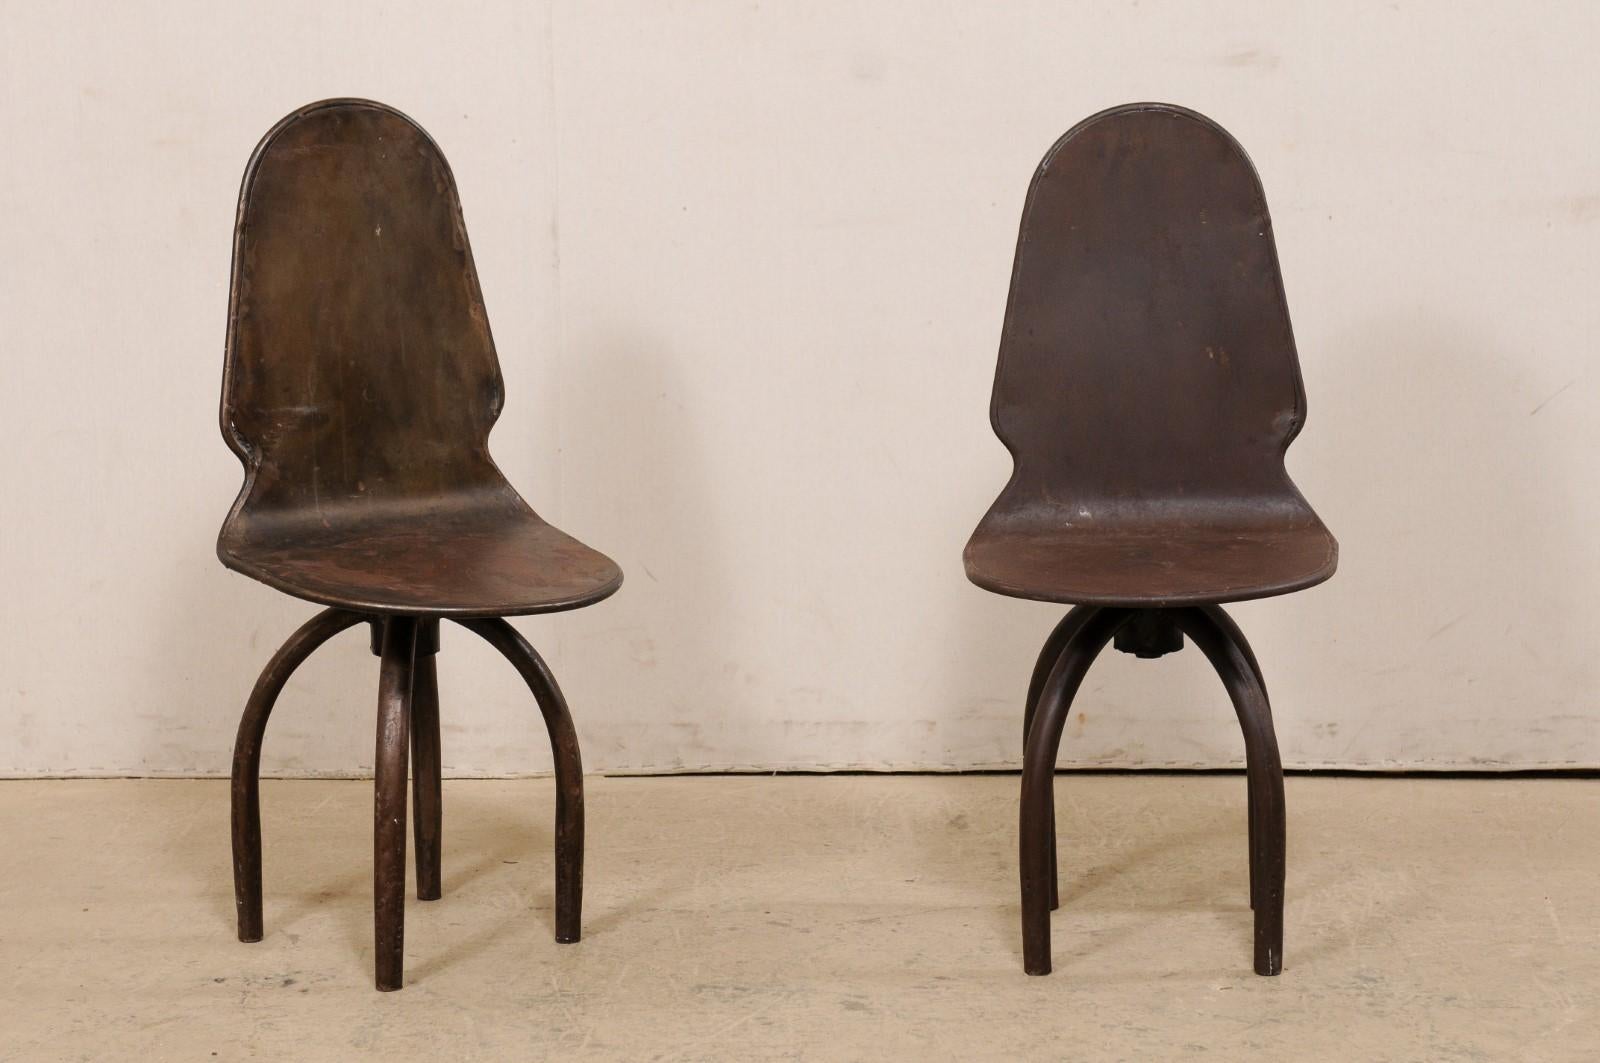 A Spanish pair of iron swivel chairs. This vintage pair of chairs from Spain are fun and quirky! They are constructed from iron and feature arched backsides with notched accents at the hips. The backs roll as one continuous piece onto the seat below